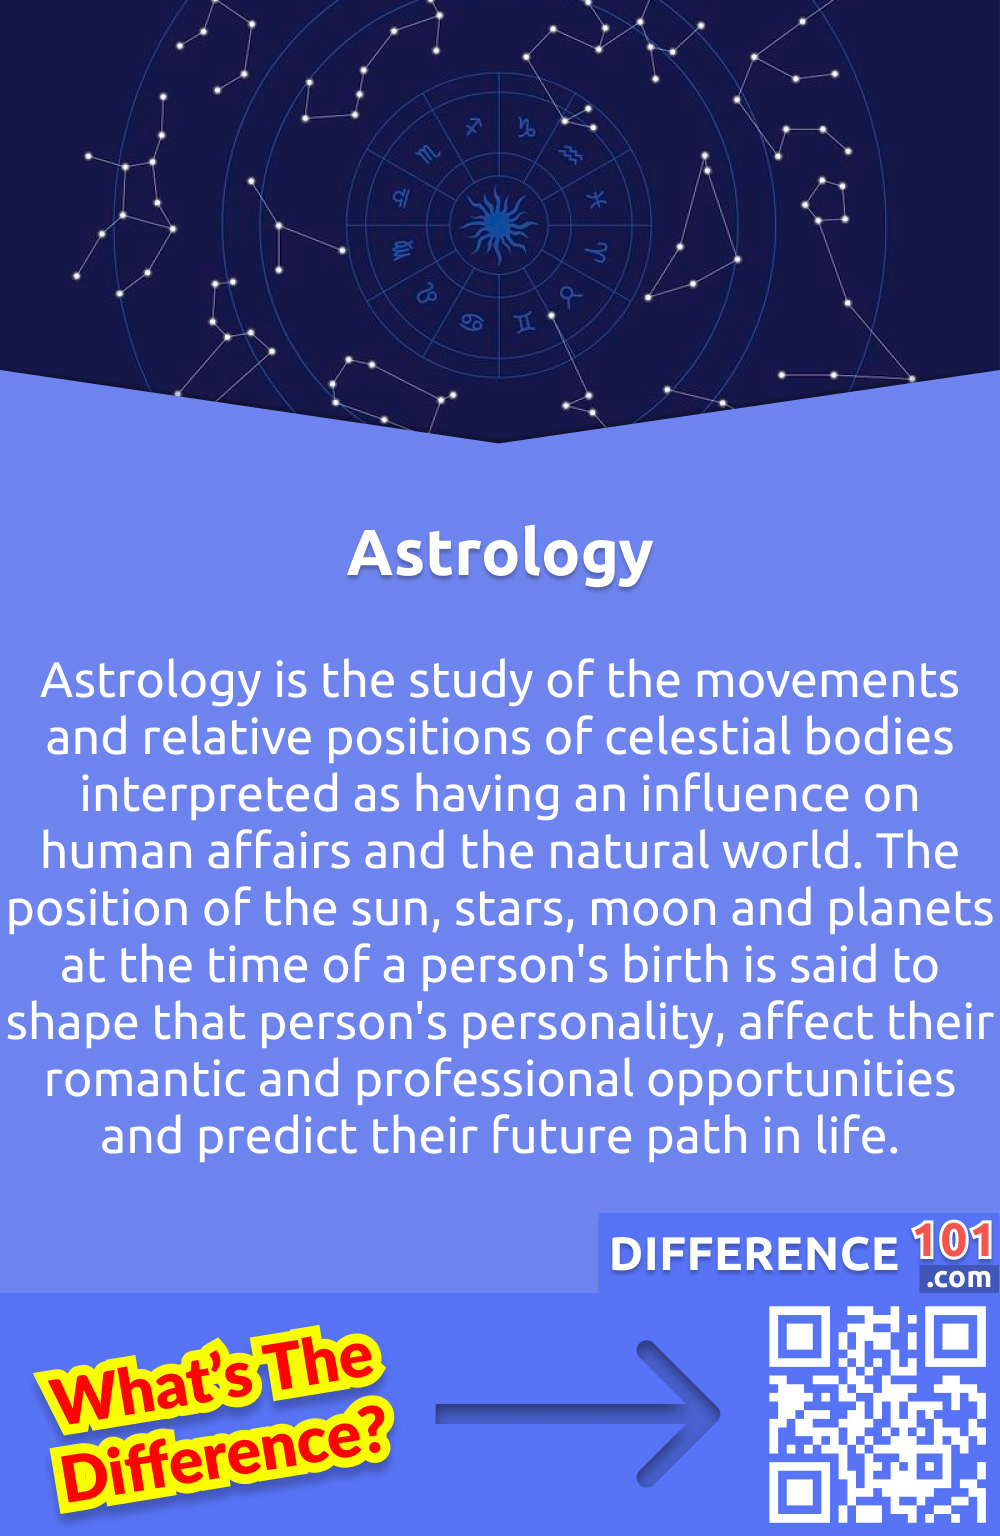 What Is Astrology? Astrology is the study of the movements and relative positions of celestial bodies interpreted as having an influence on human affairs and the natural world. The position of the sun, stars, moon and planets at the time of a person's birth is said to shape that person's personality, affect their romantic and professional opportunities and predict their future path in life.